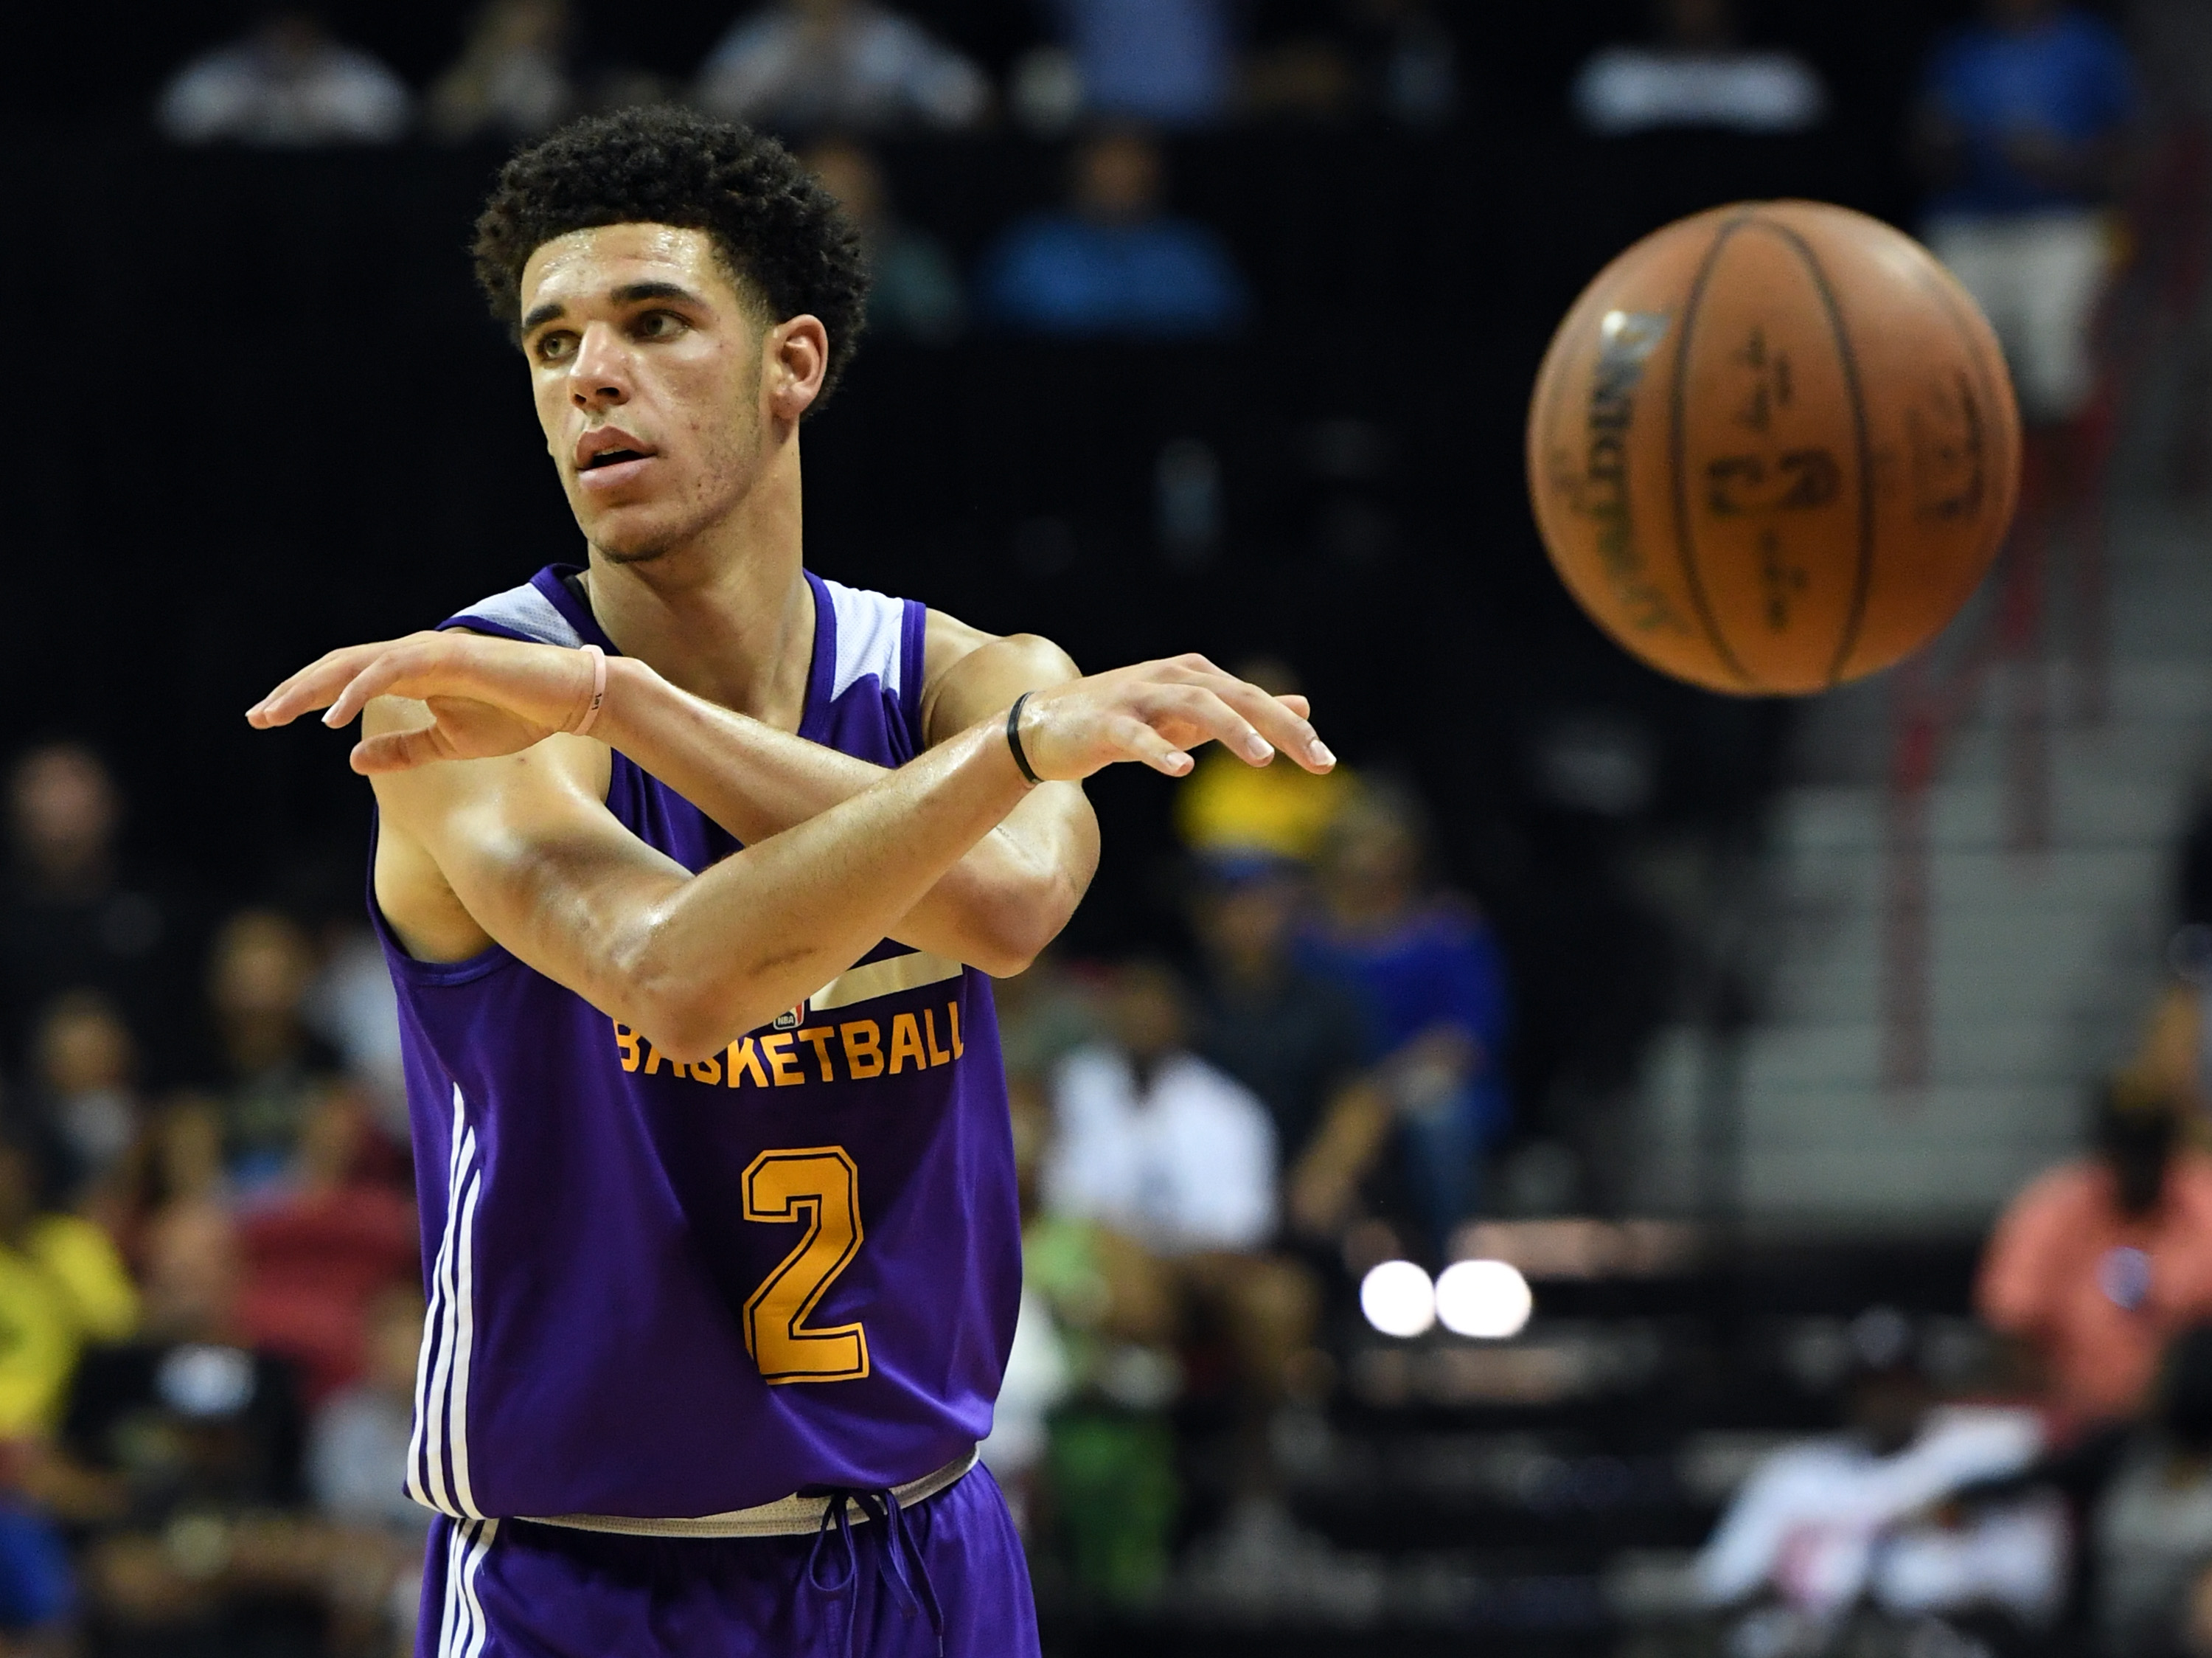 Los Angeles Lakers: Lonzo Ball is just an average NBA player